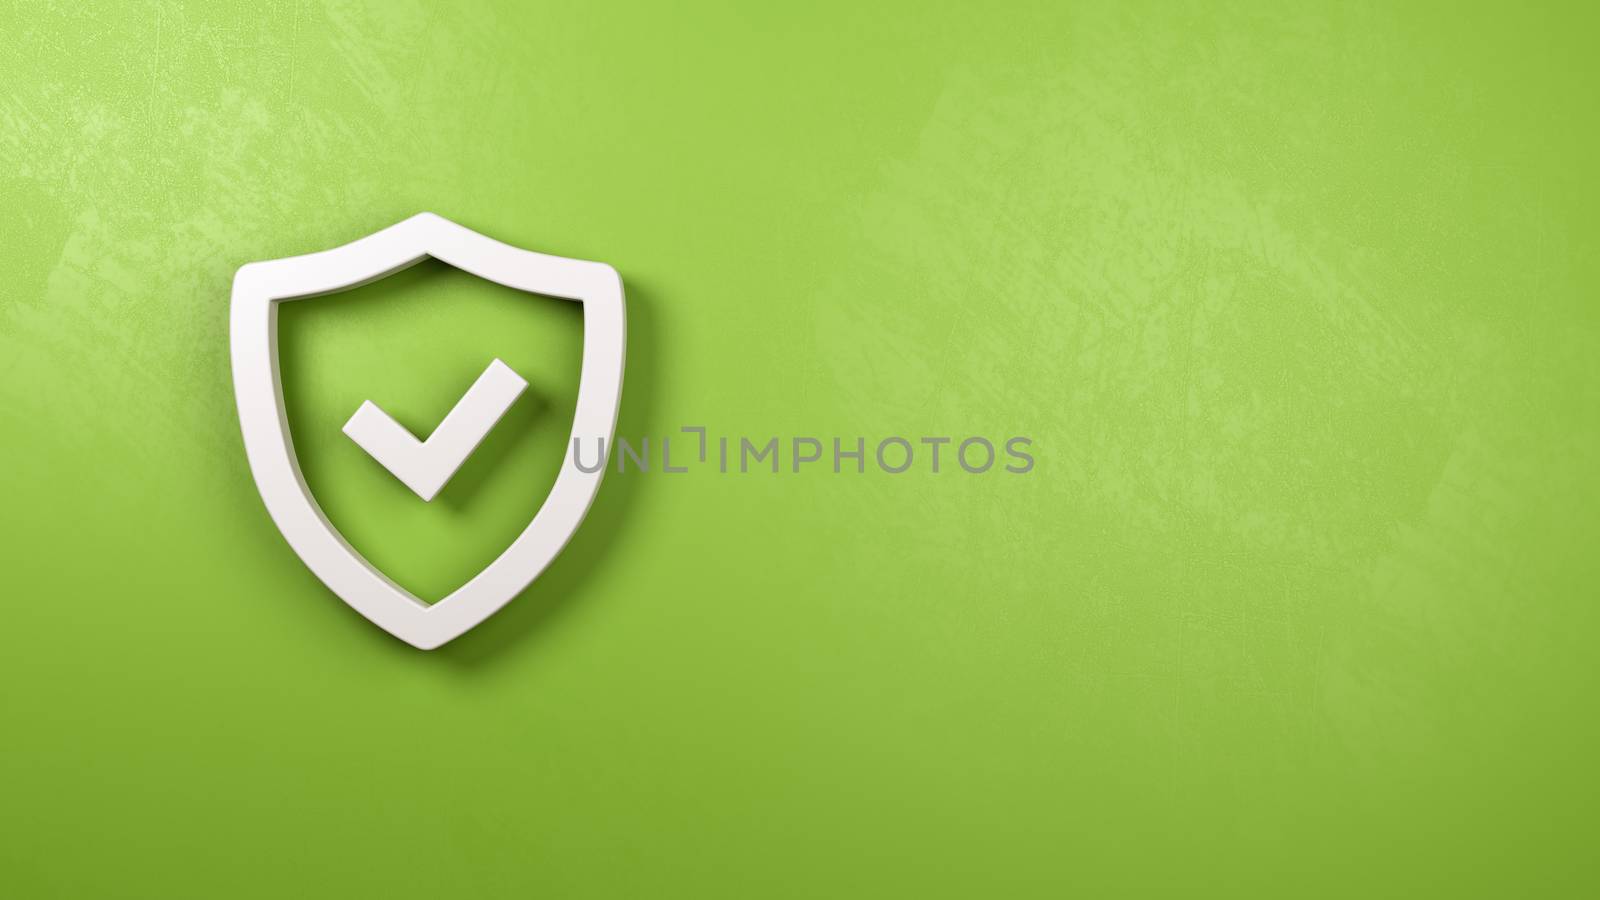 White Shield 3D Symbol Shape with Tick Symbol on a Green Plastered Wall with Copy Space 3D Illustration